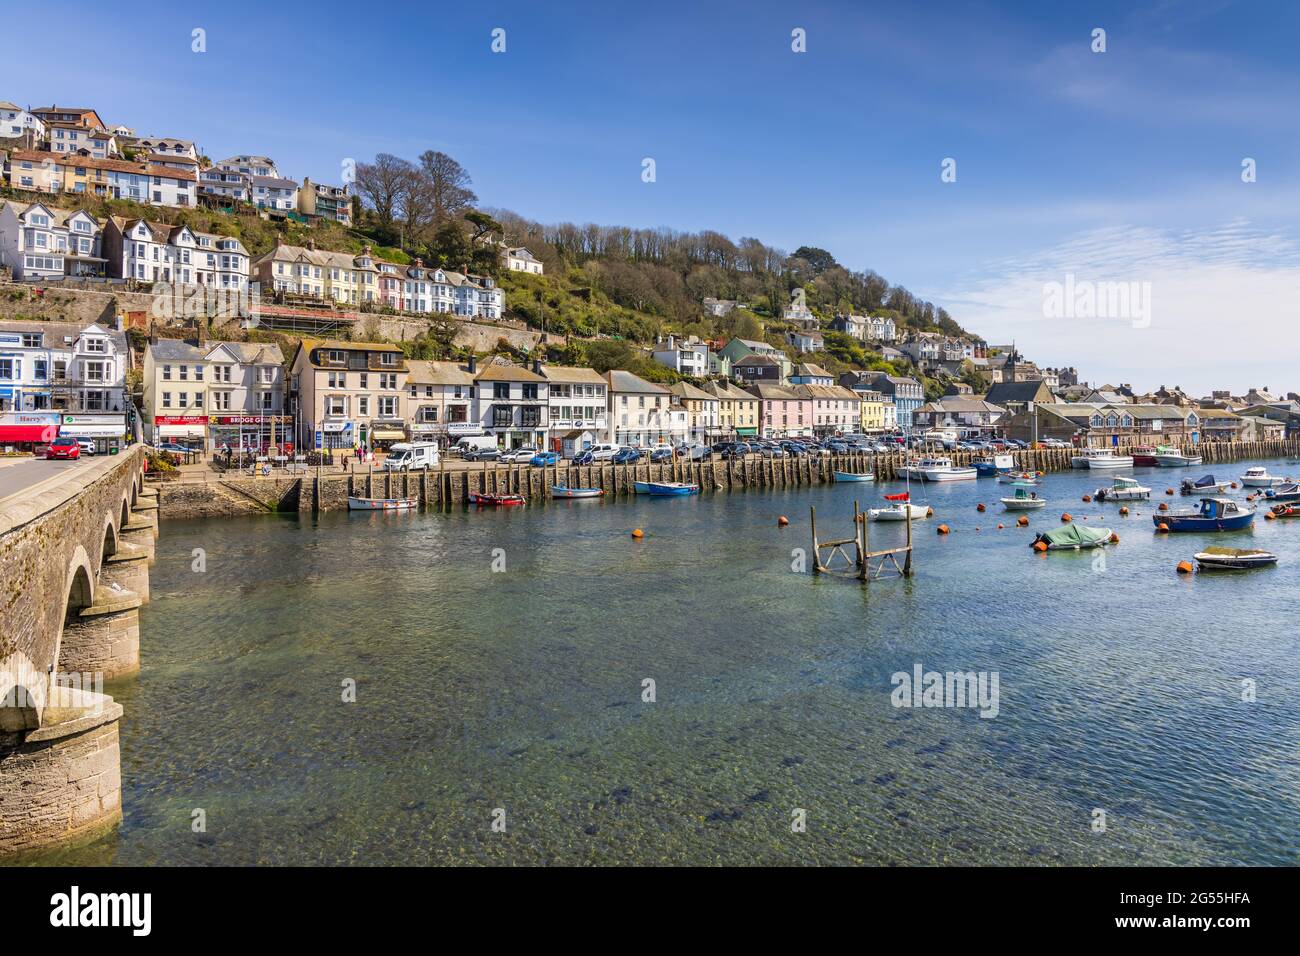 Boats moored on the Looe River in Cornwall. Looe is a very popular holiday resort, and is also notable for its fish market and numerous fishing boats. Stock Photo